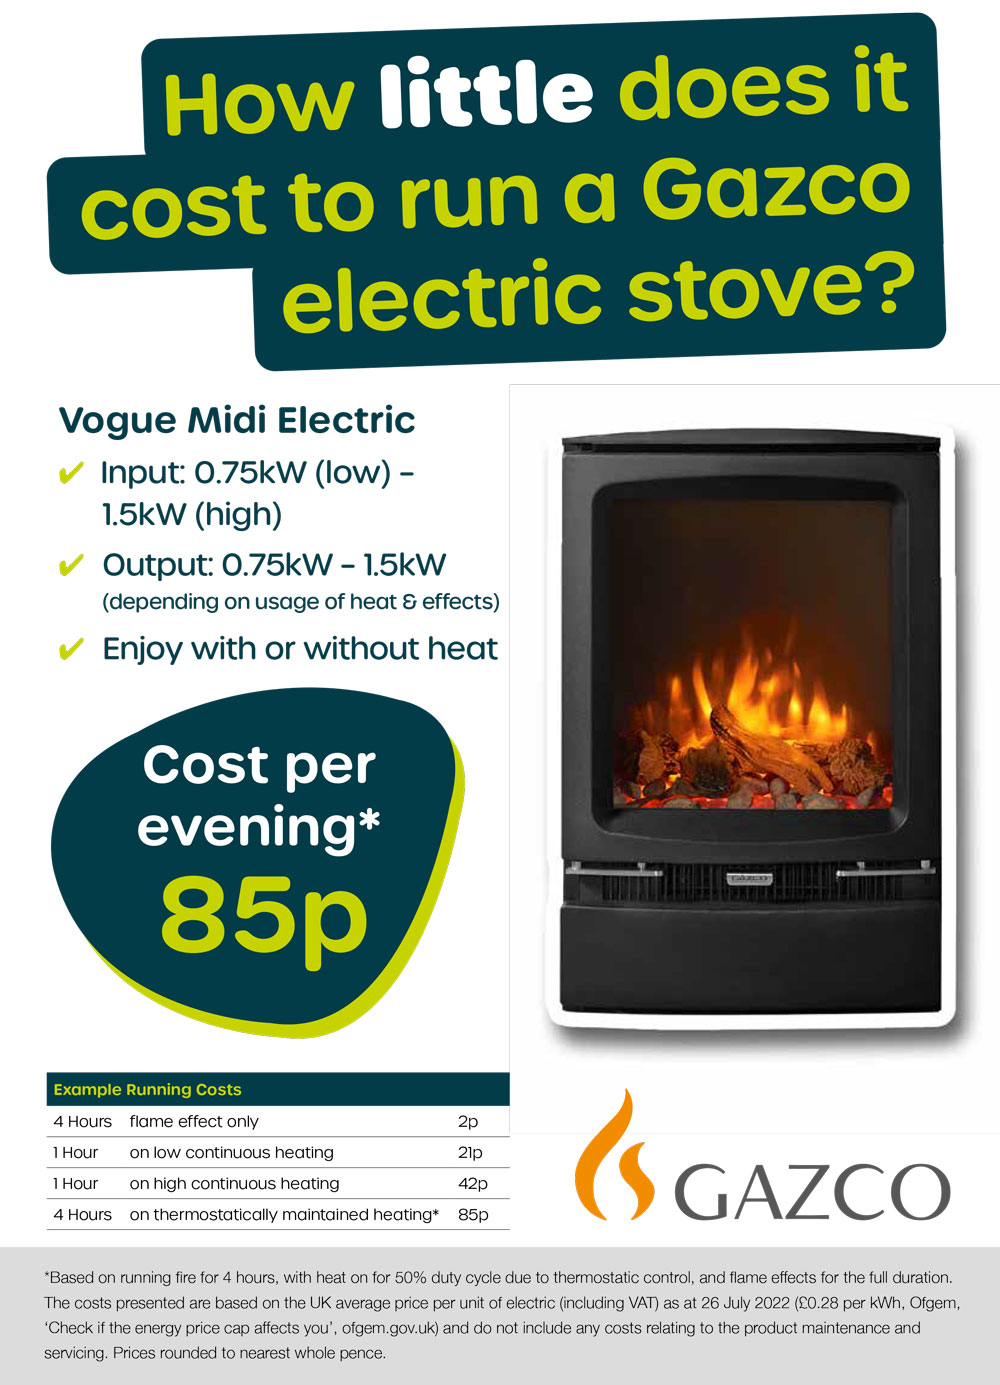 How much does it cost to run an electric stove